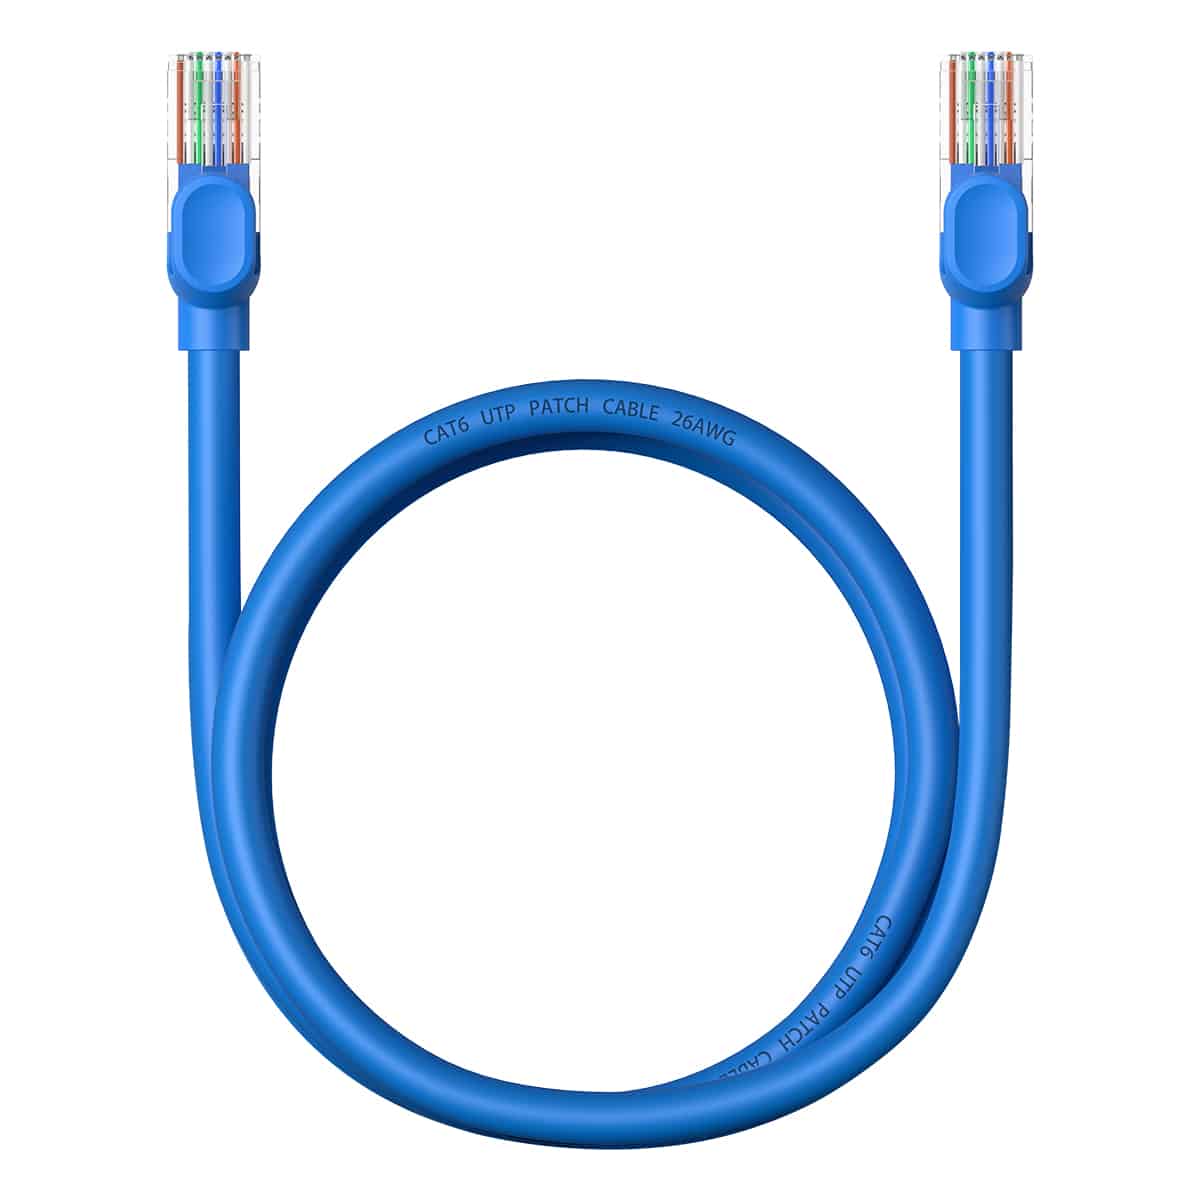 Baseus High Speed CAT6 Gigabit Ethernet Cable (Round Cable) Blue